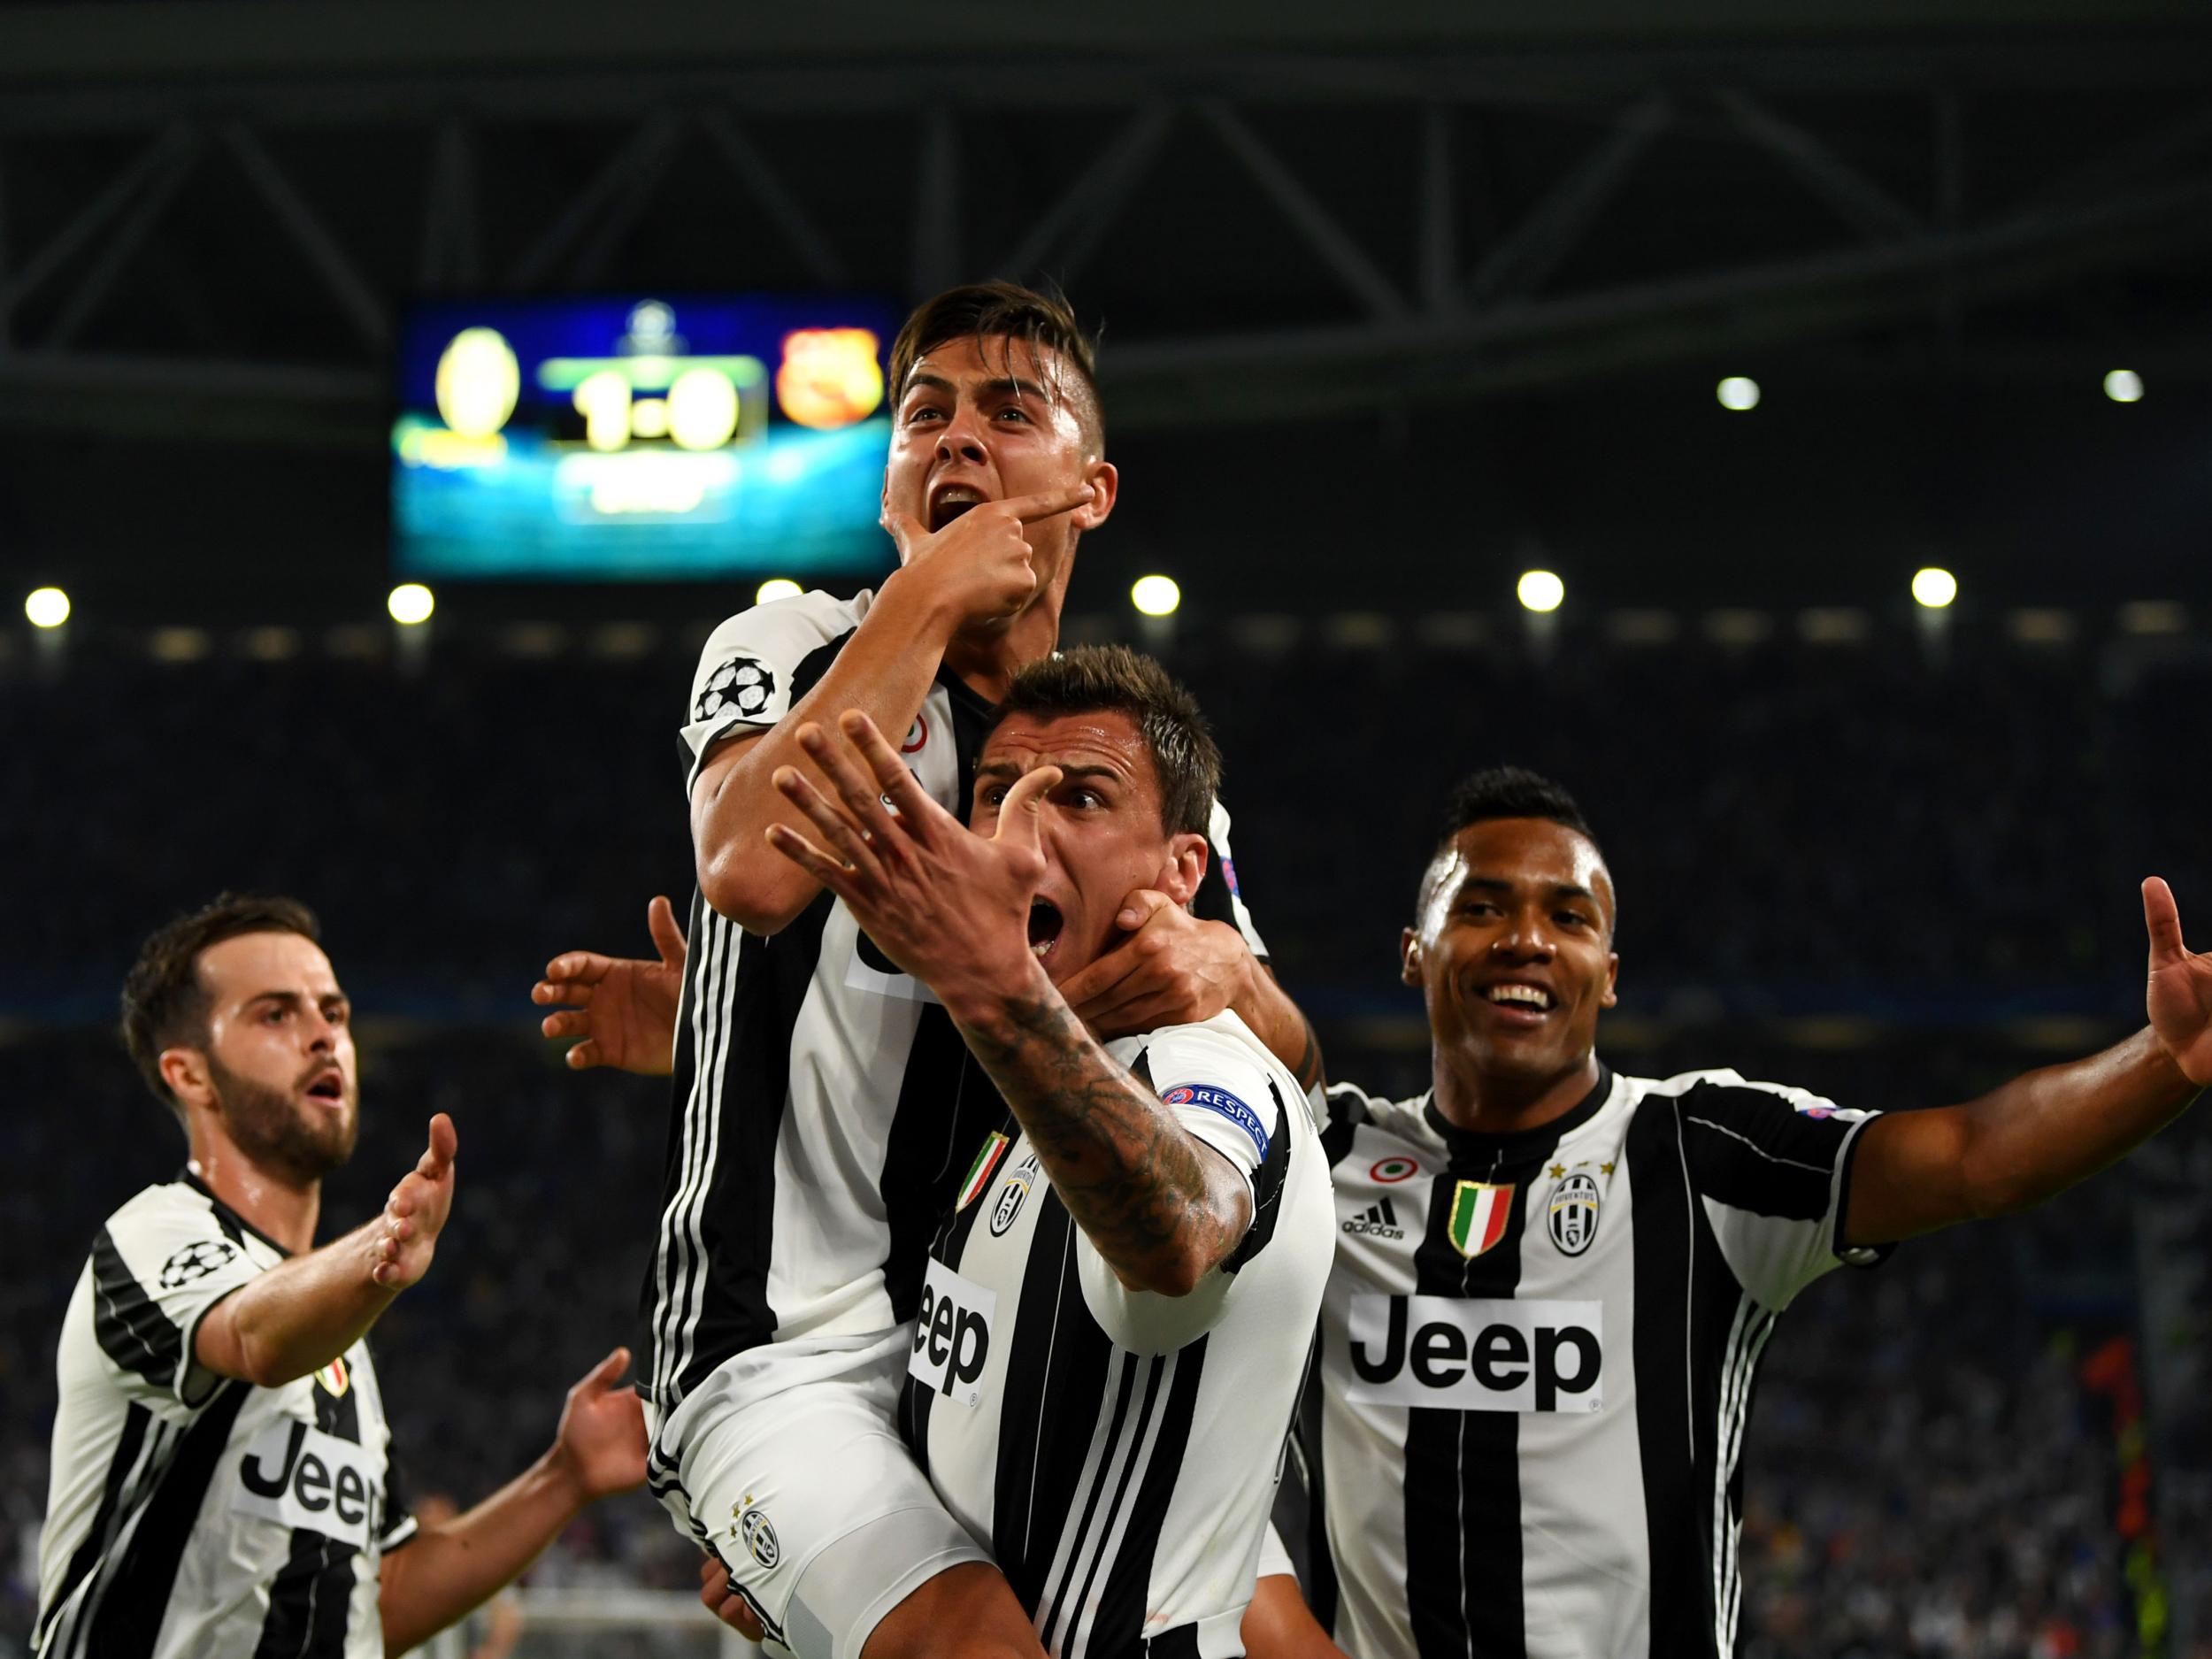 Dybala set Juventus on the path to victory with two superb first-half goals